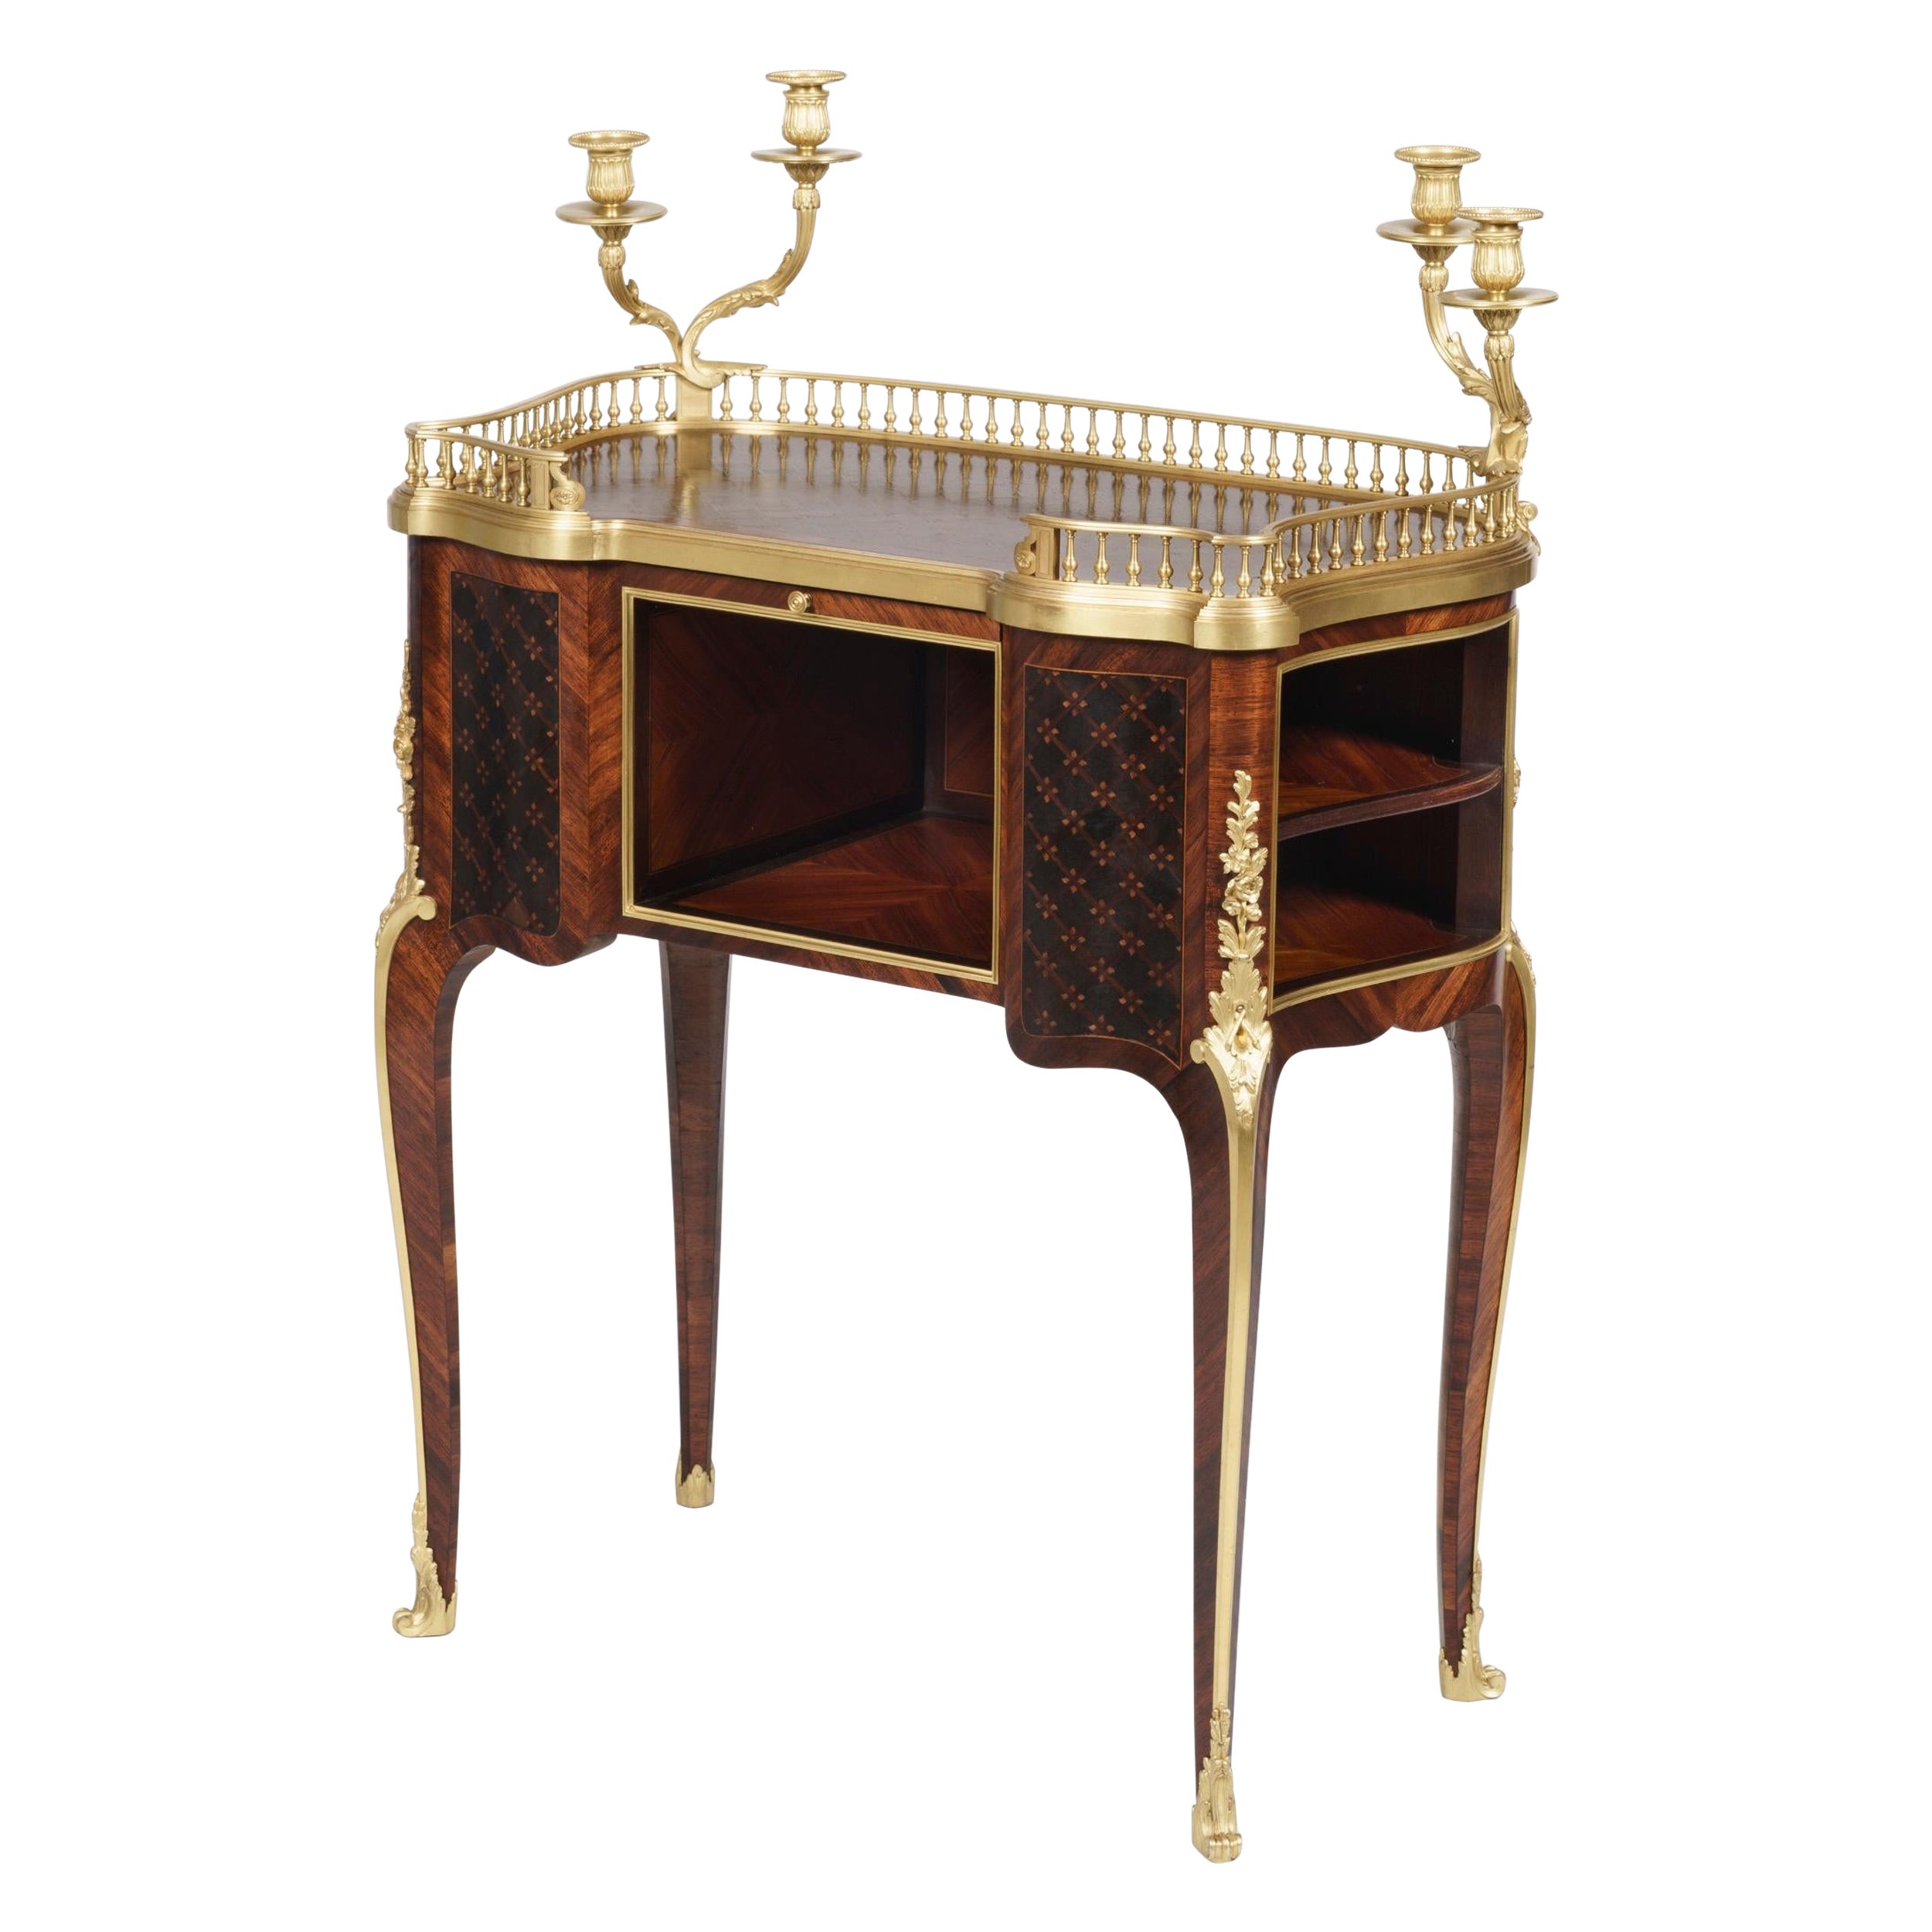 19th Century Ormolu-Mounted Table in the Louis XV Style by Maison Sormani For Sale